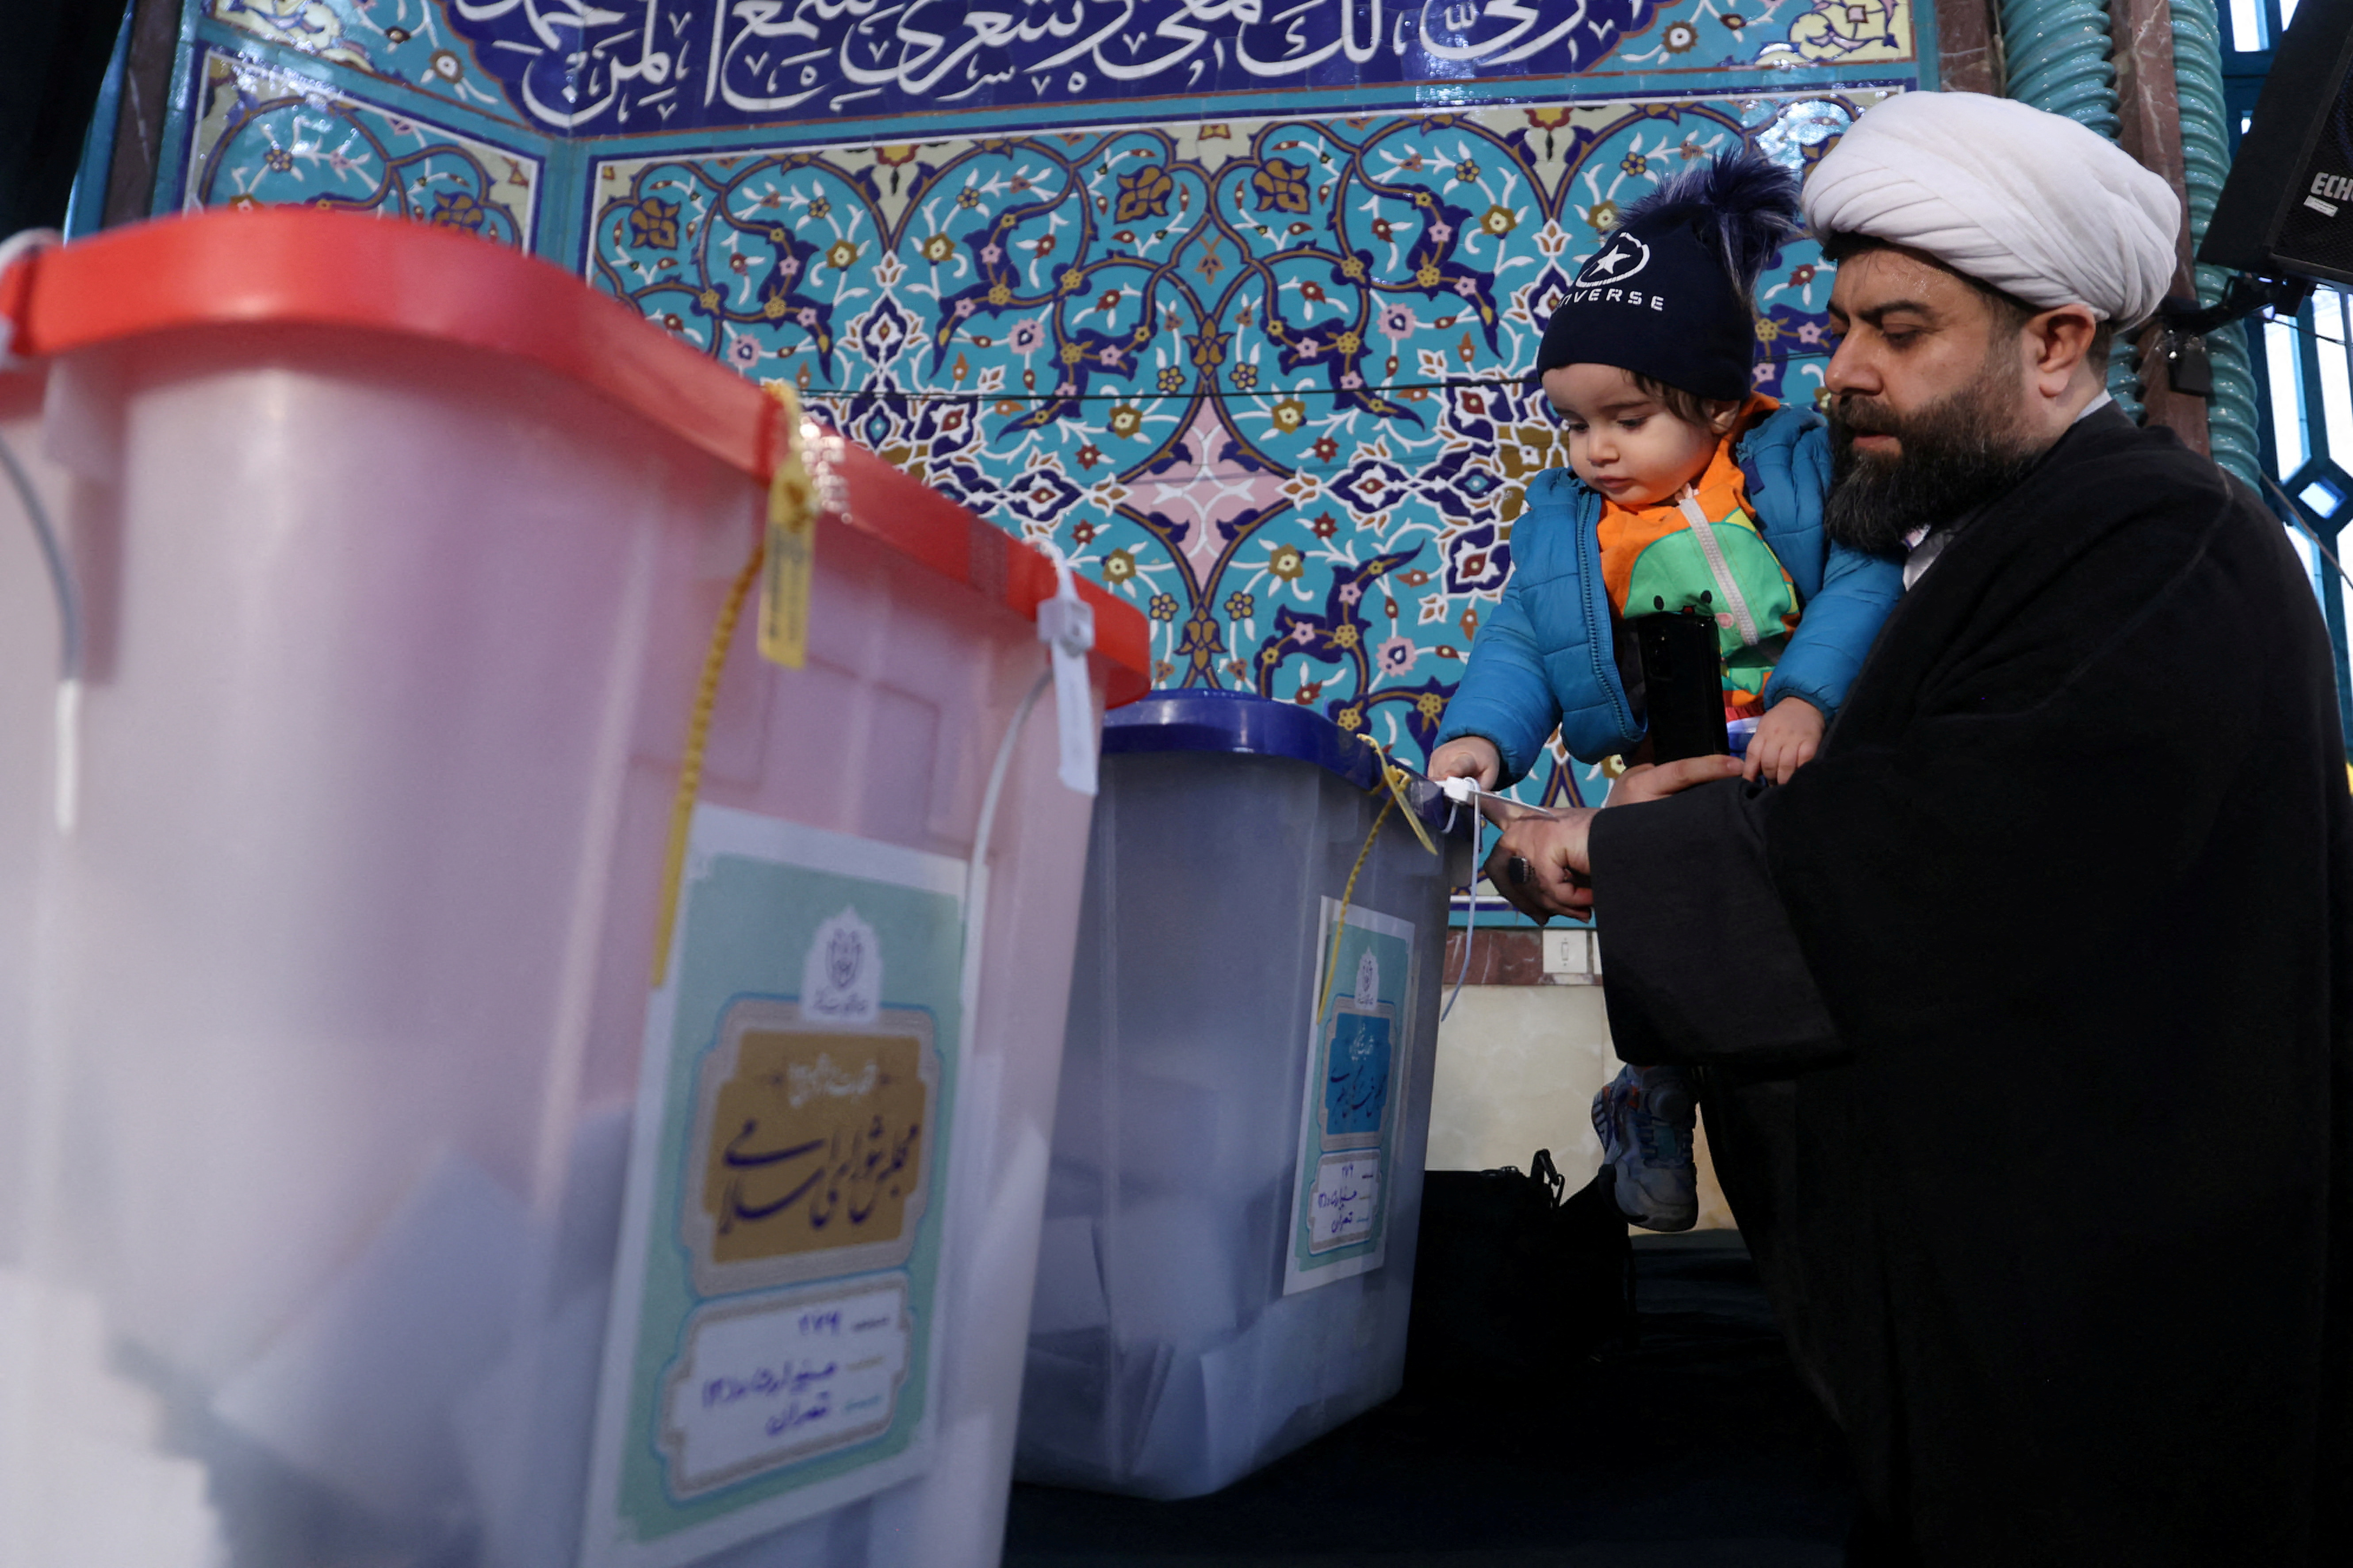 Iranians vote during parliamentary elections at a polling station in Tehran